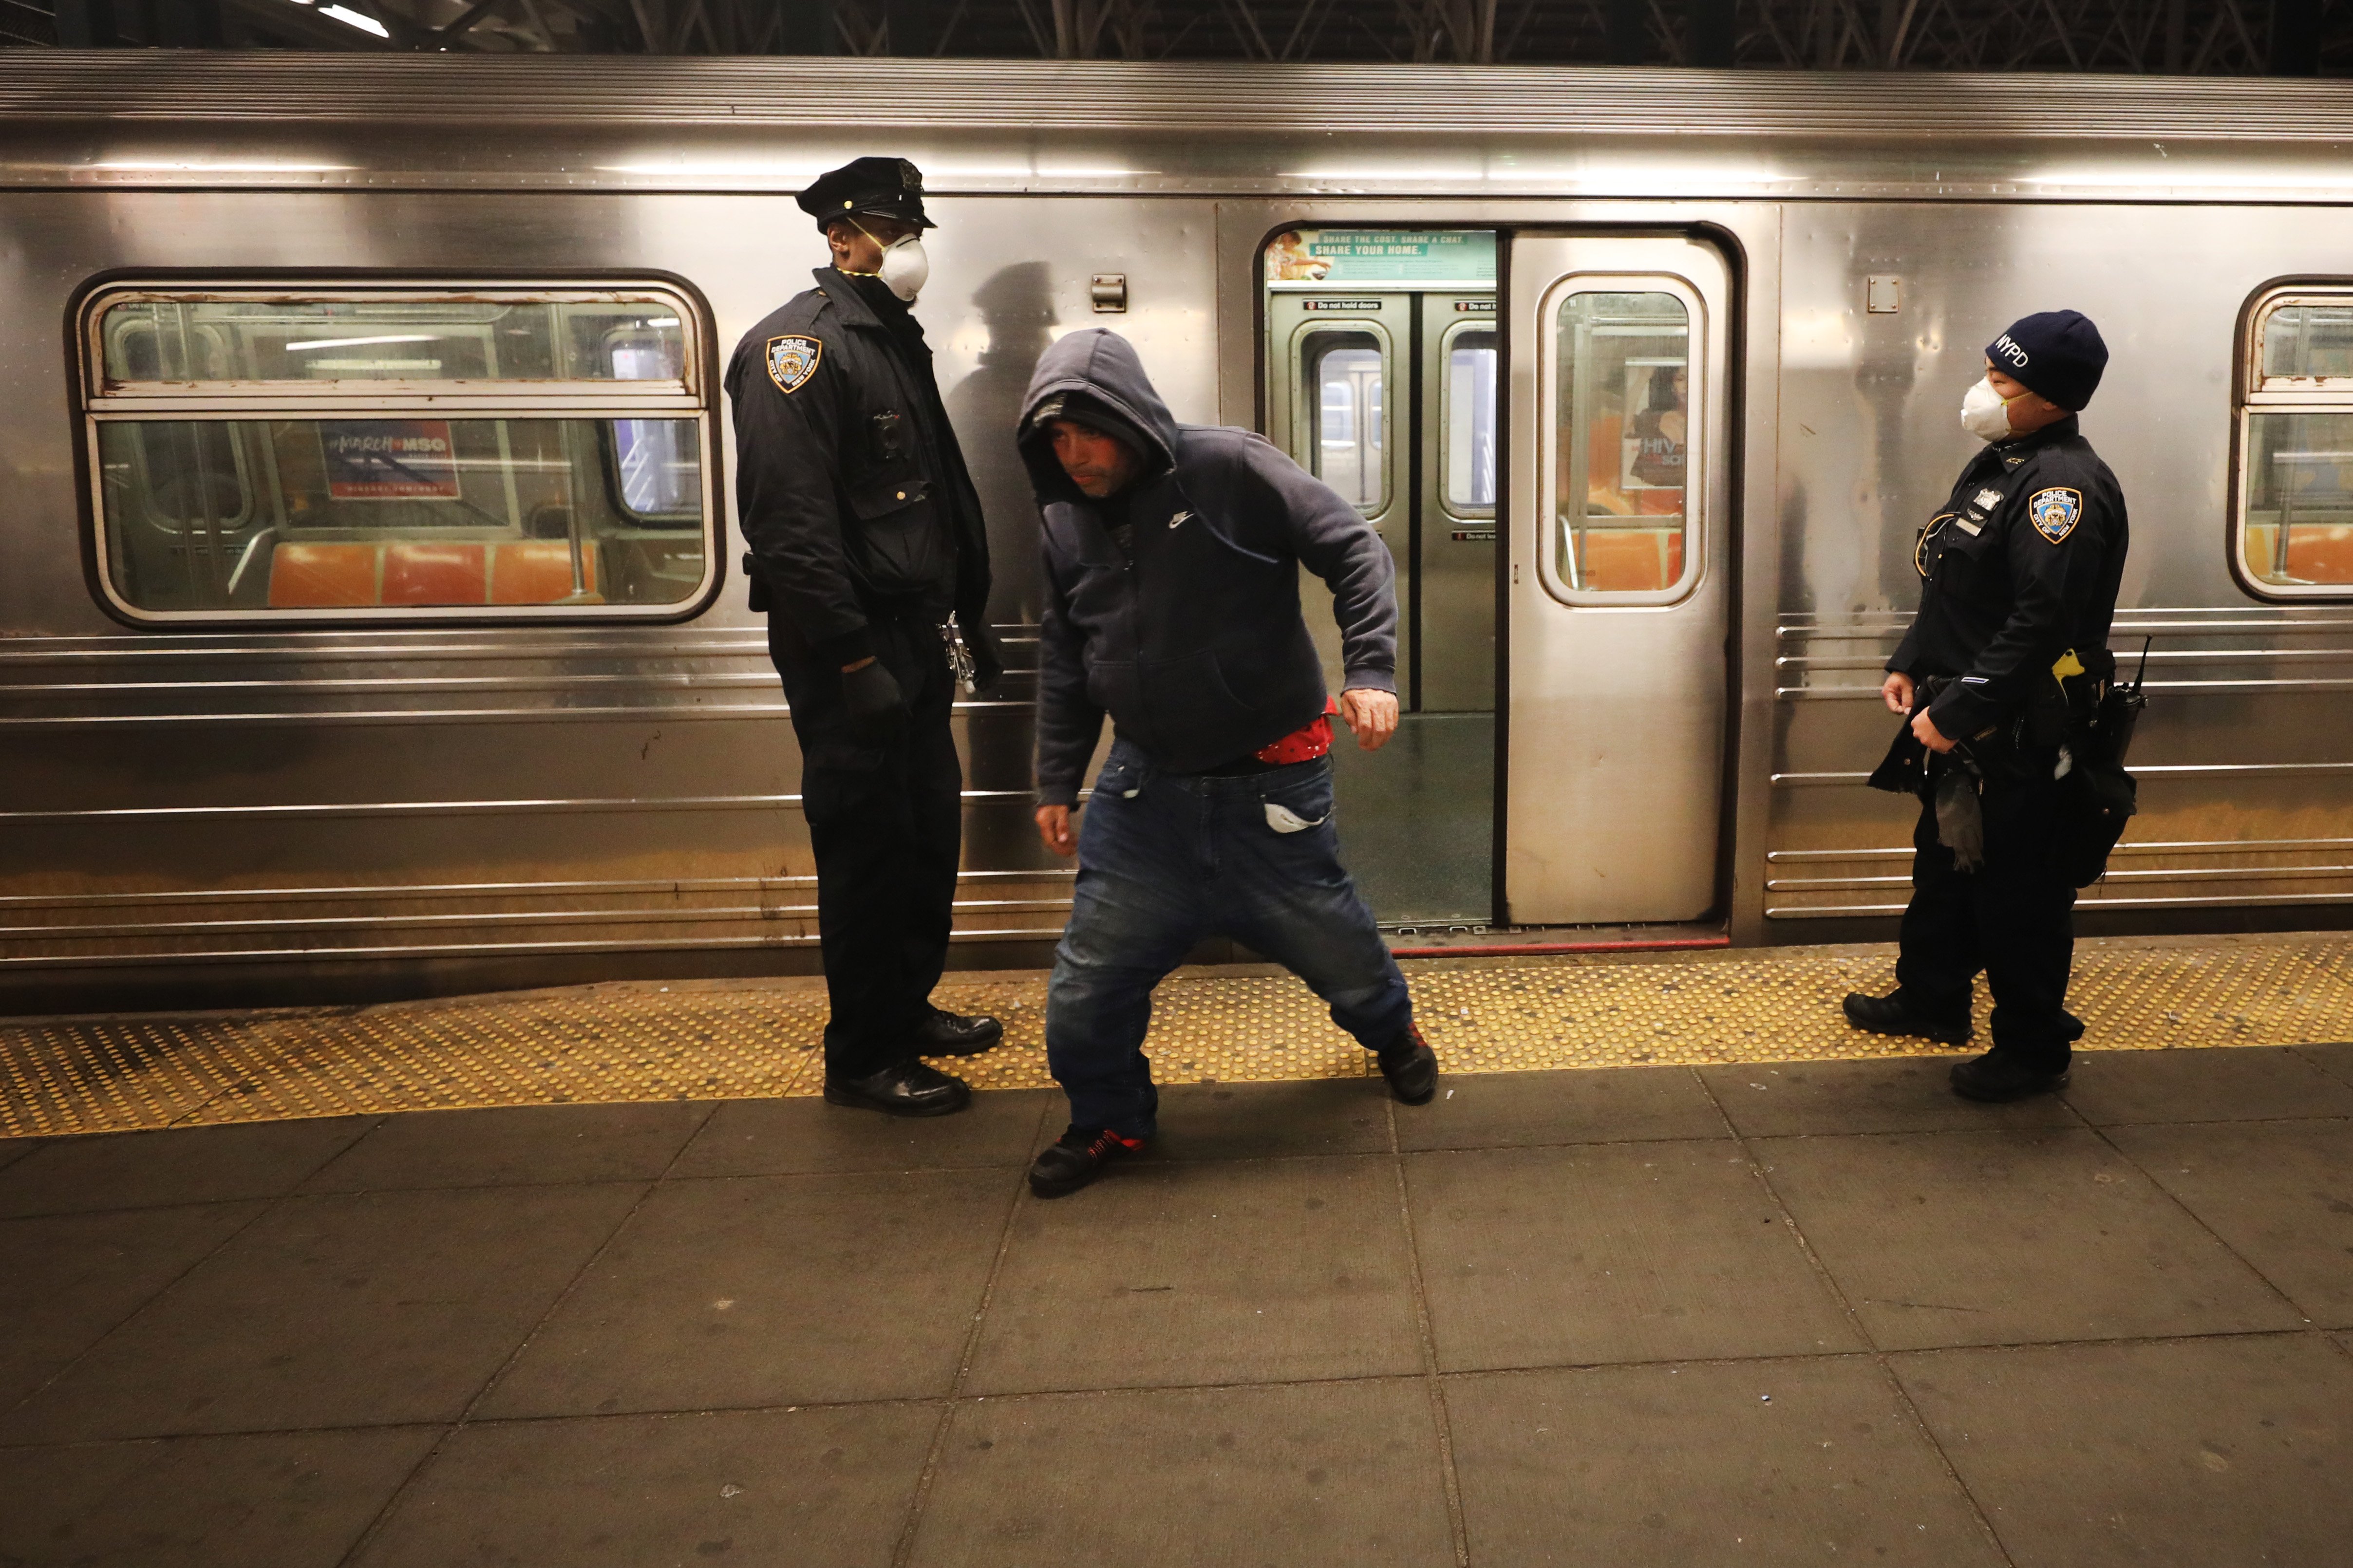 A homeless man runs by New York police on May 07, 2020. (Photo: Spencer Platt/Getty Images)